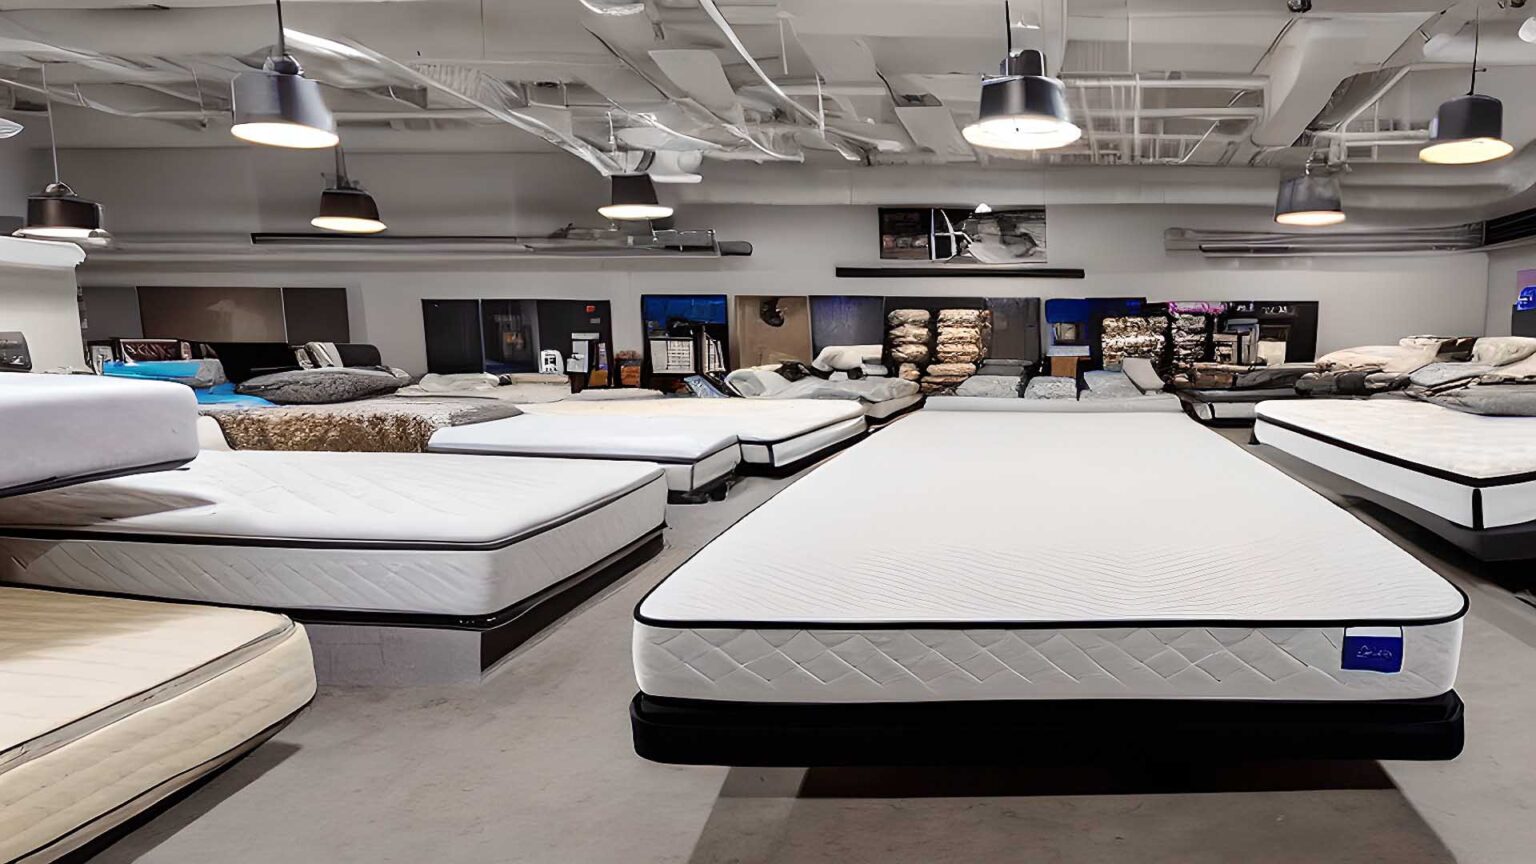 Mattress Stores, mattress dealers, and mattress retailers near me in Springfield, OH